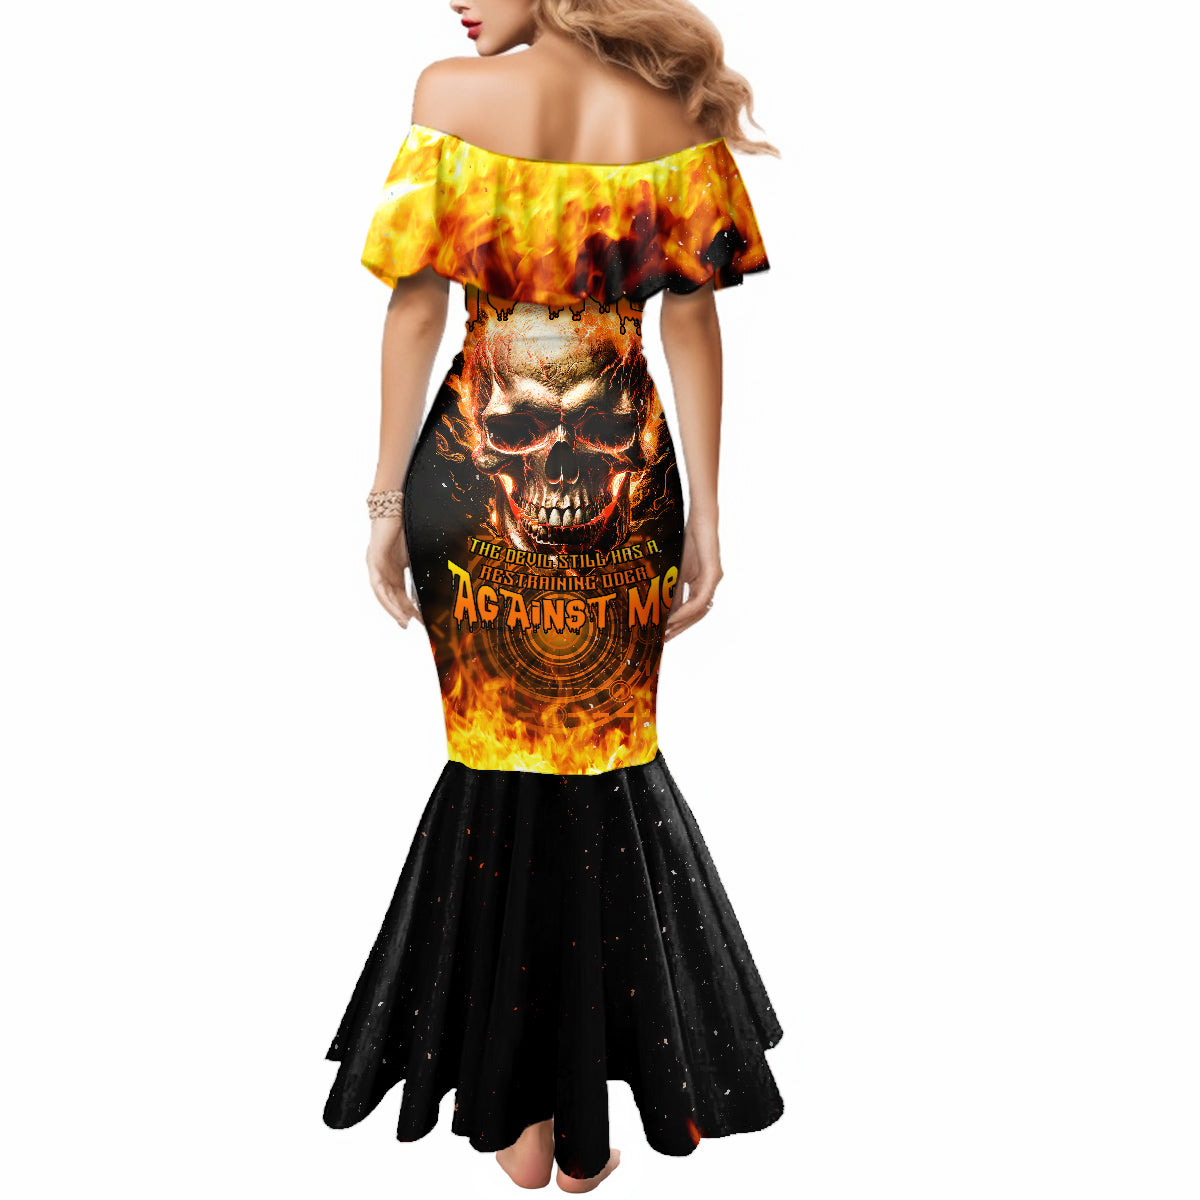 magic-fire-skull-mermaid-dress-i-cant-go-to-hell-the-devil-still-has-a-rest-training-oder-against-me